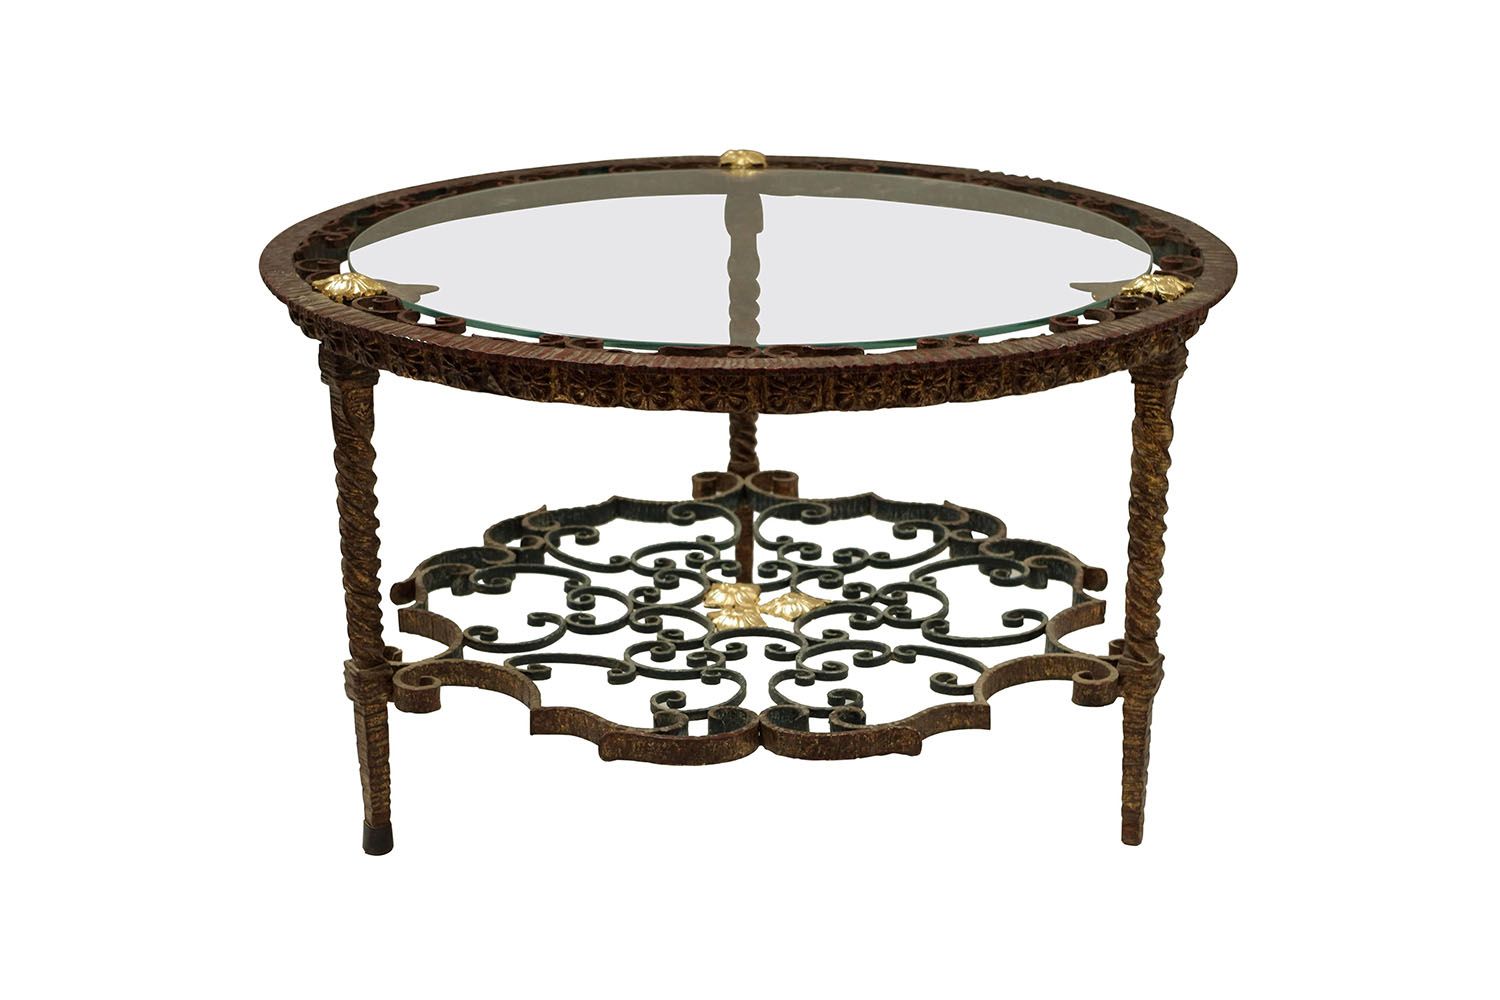 Wrought Iron Round Coffee Table, Italian Work, Circa 1950 With Iron Coffee Tables (View 14 of 15)